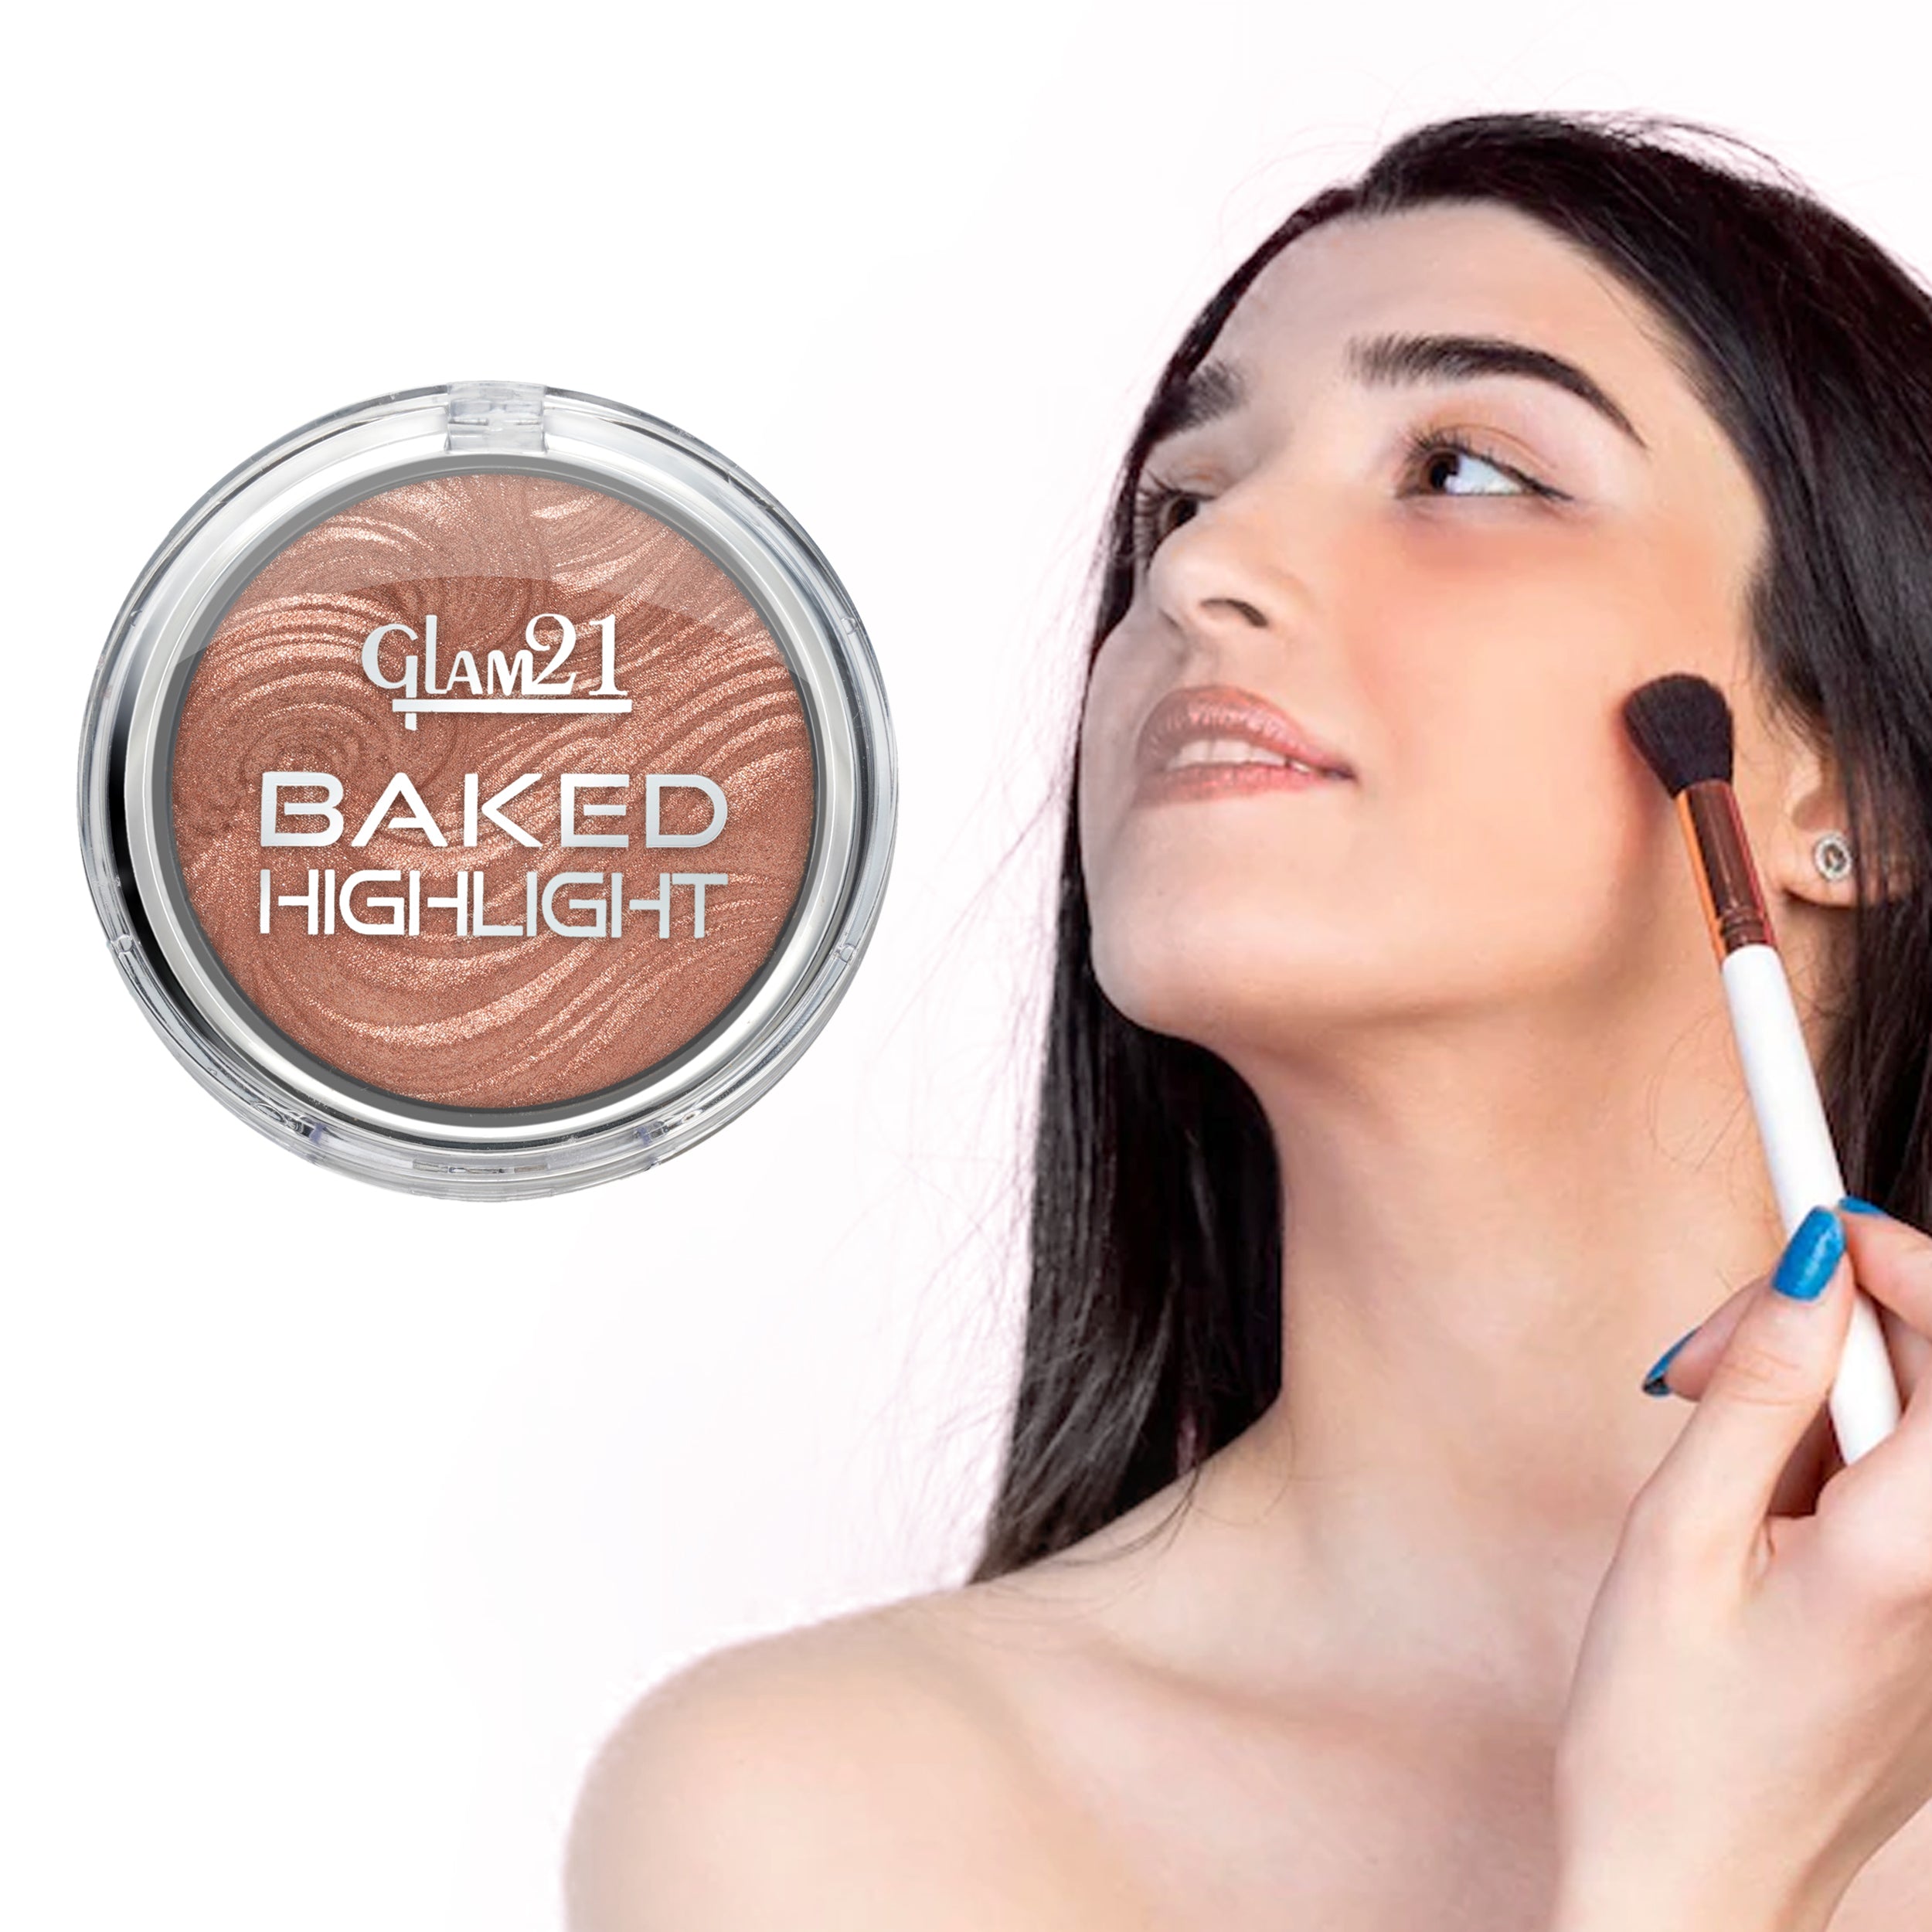 Glam21 Baked Highlighter with Silky Pigments Shimmer Look & Longlasting Mettalic Finish Highlighter, 2.8 g (Shade-04)